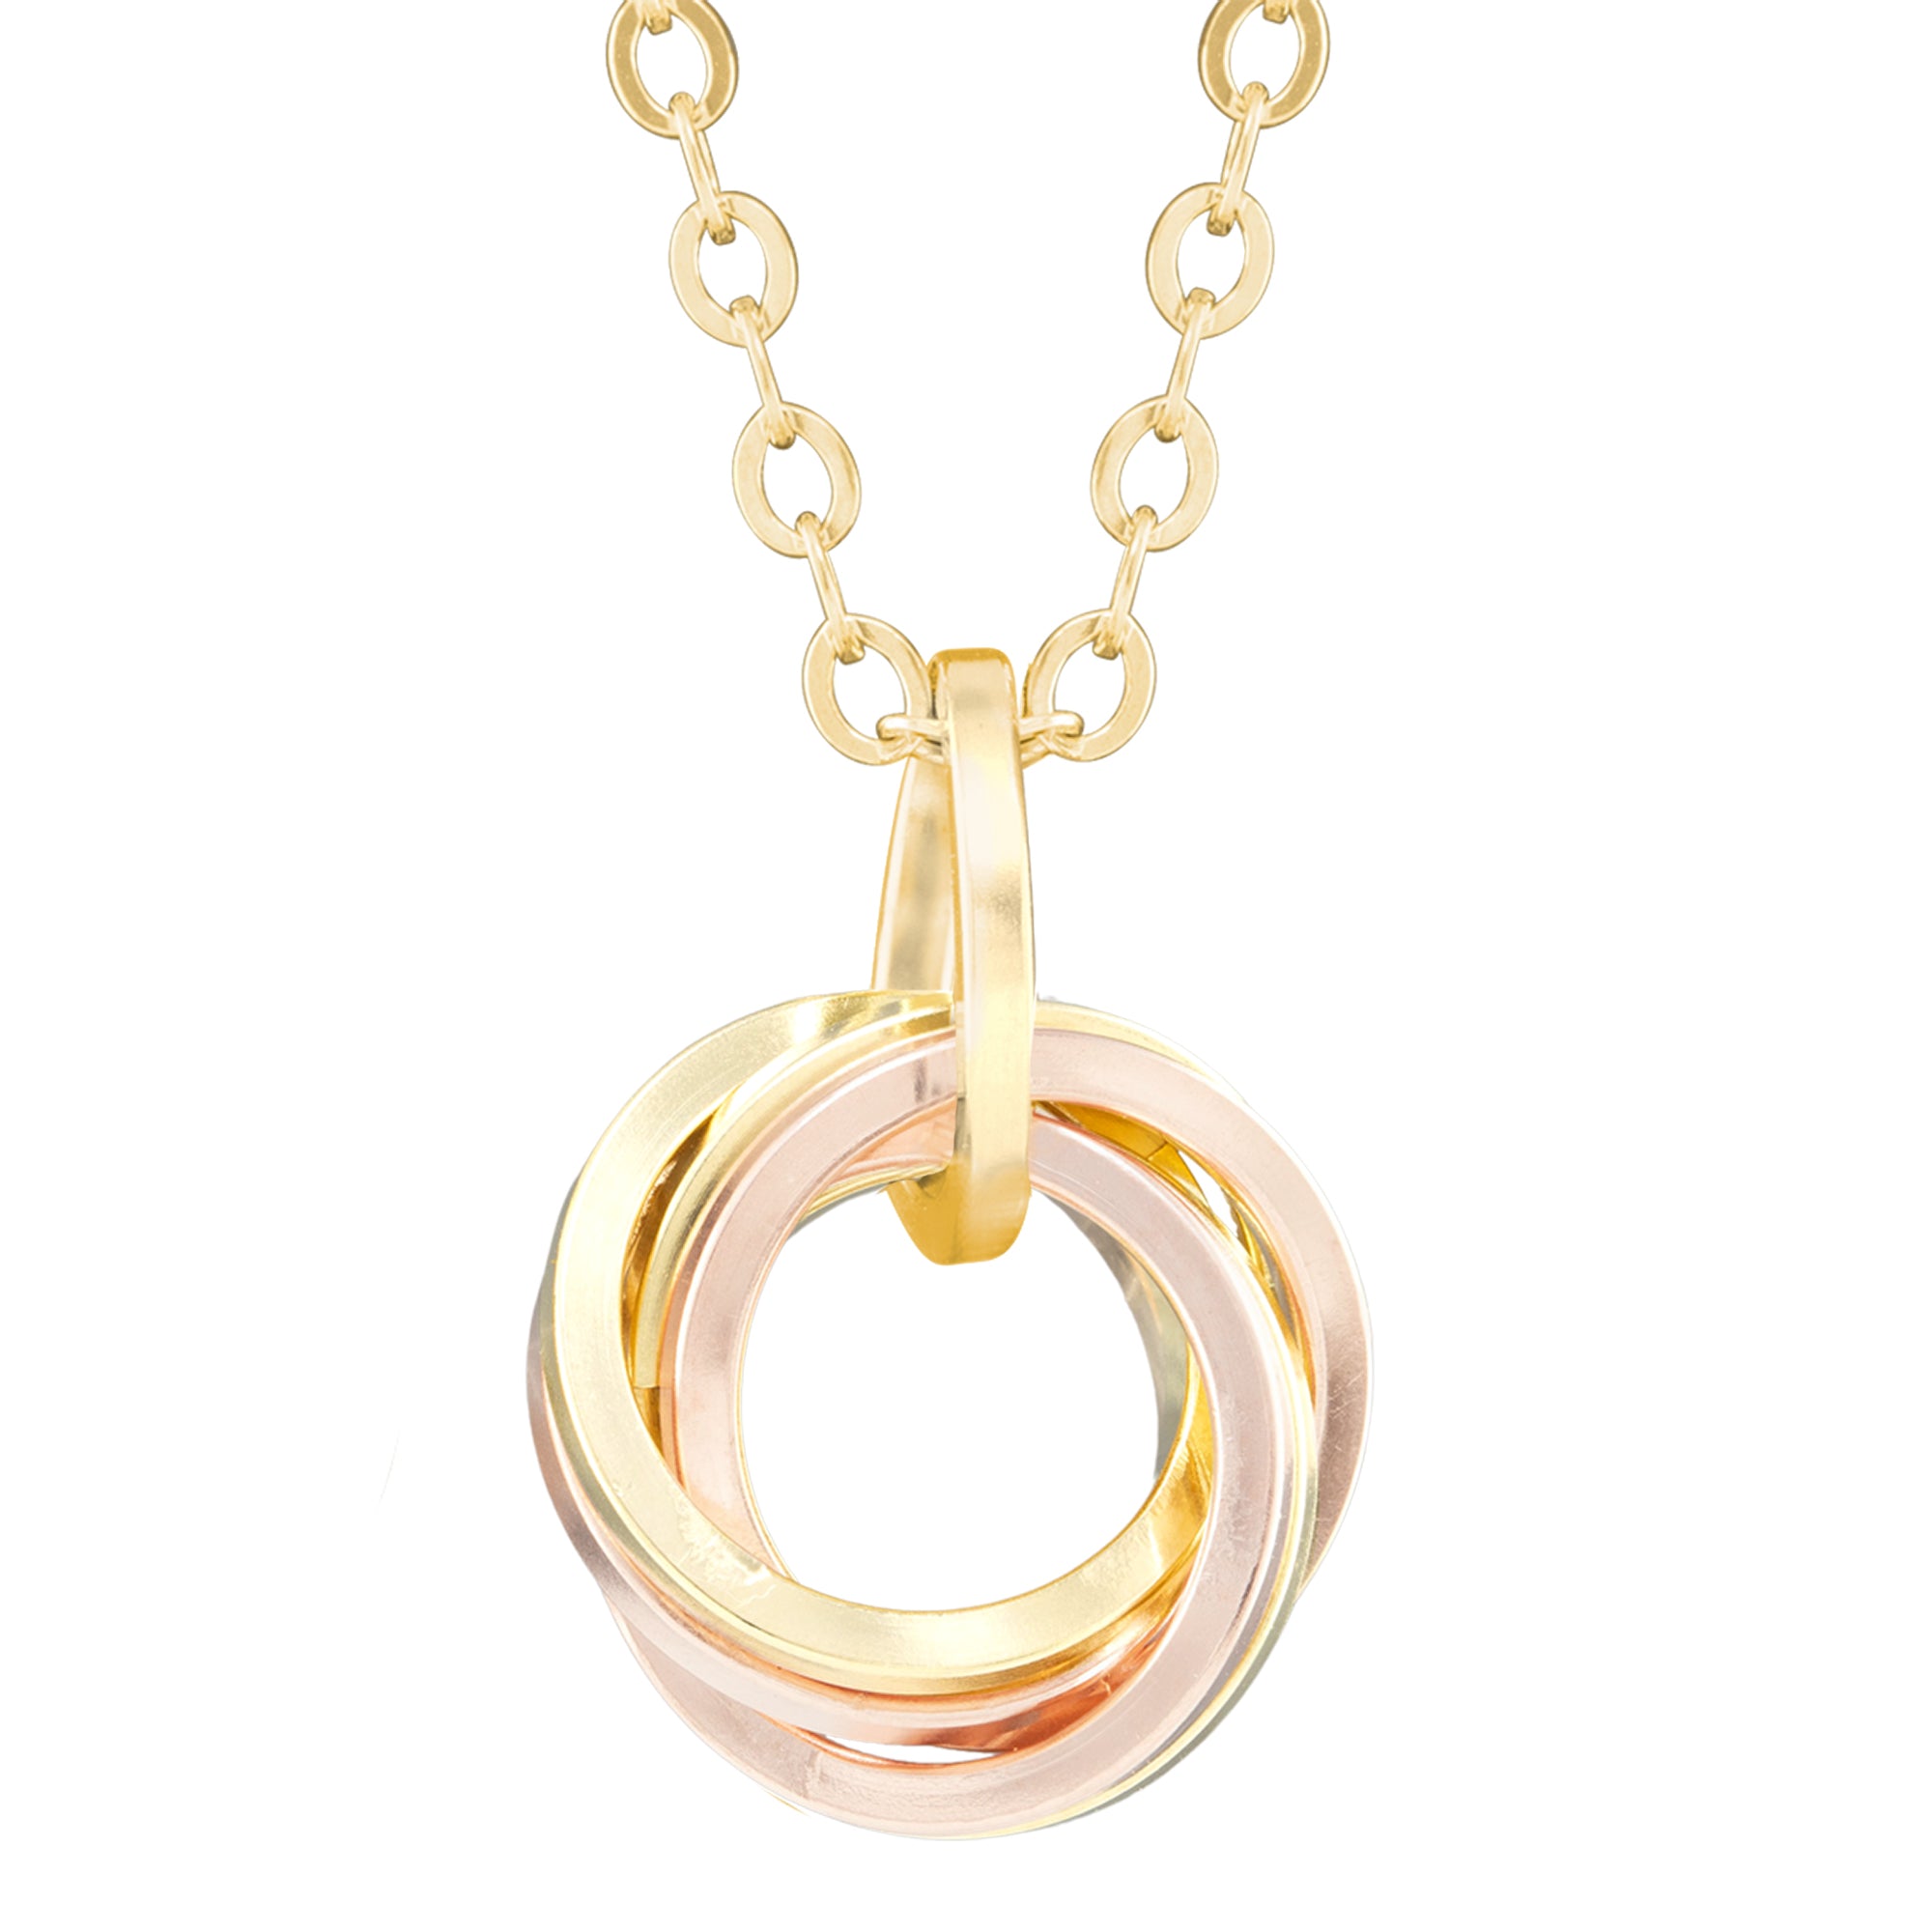 Mixed 14K Yellow and Rose Gold Fill Classic Love Knot Pendant Necklace - 18" or 20" Chain Included